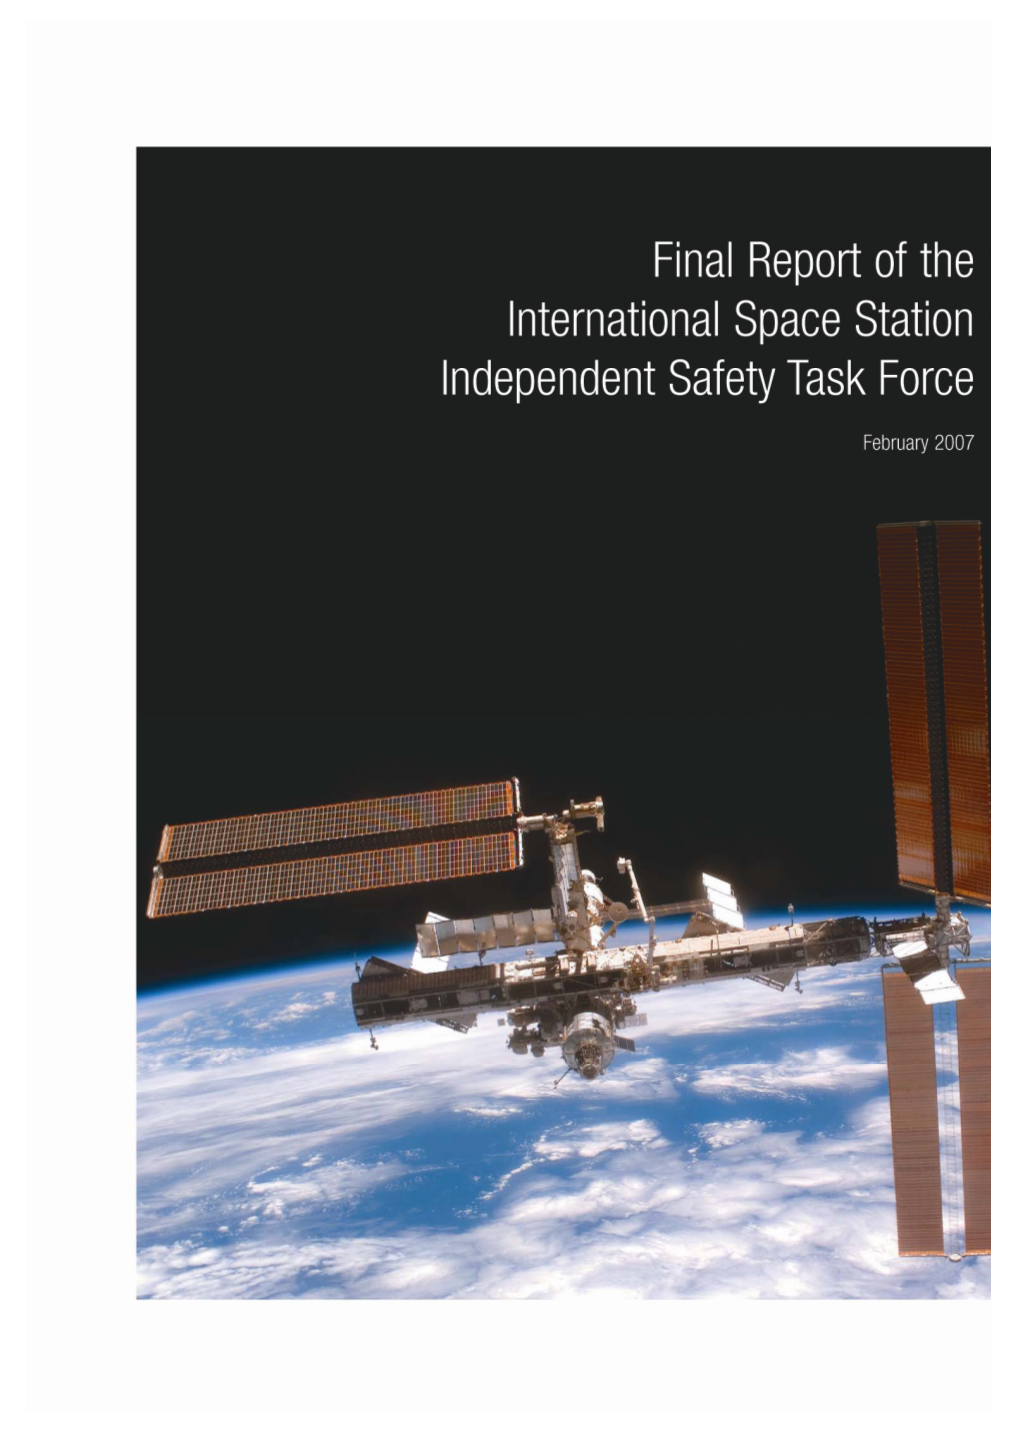 Final Report of the International Space Station Independent Safety Task